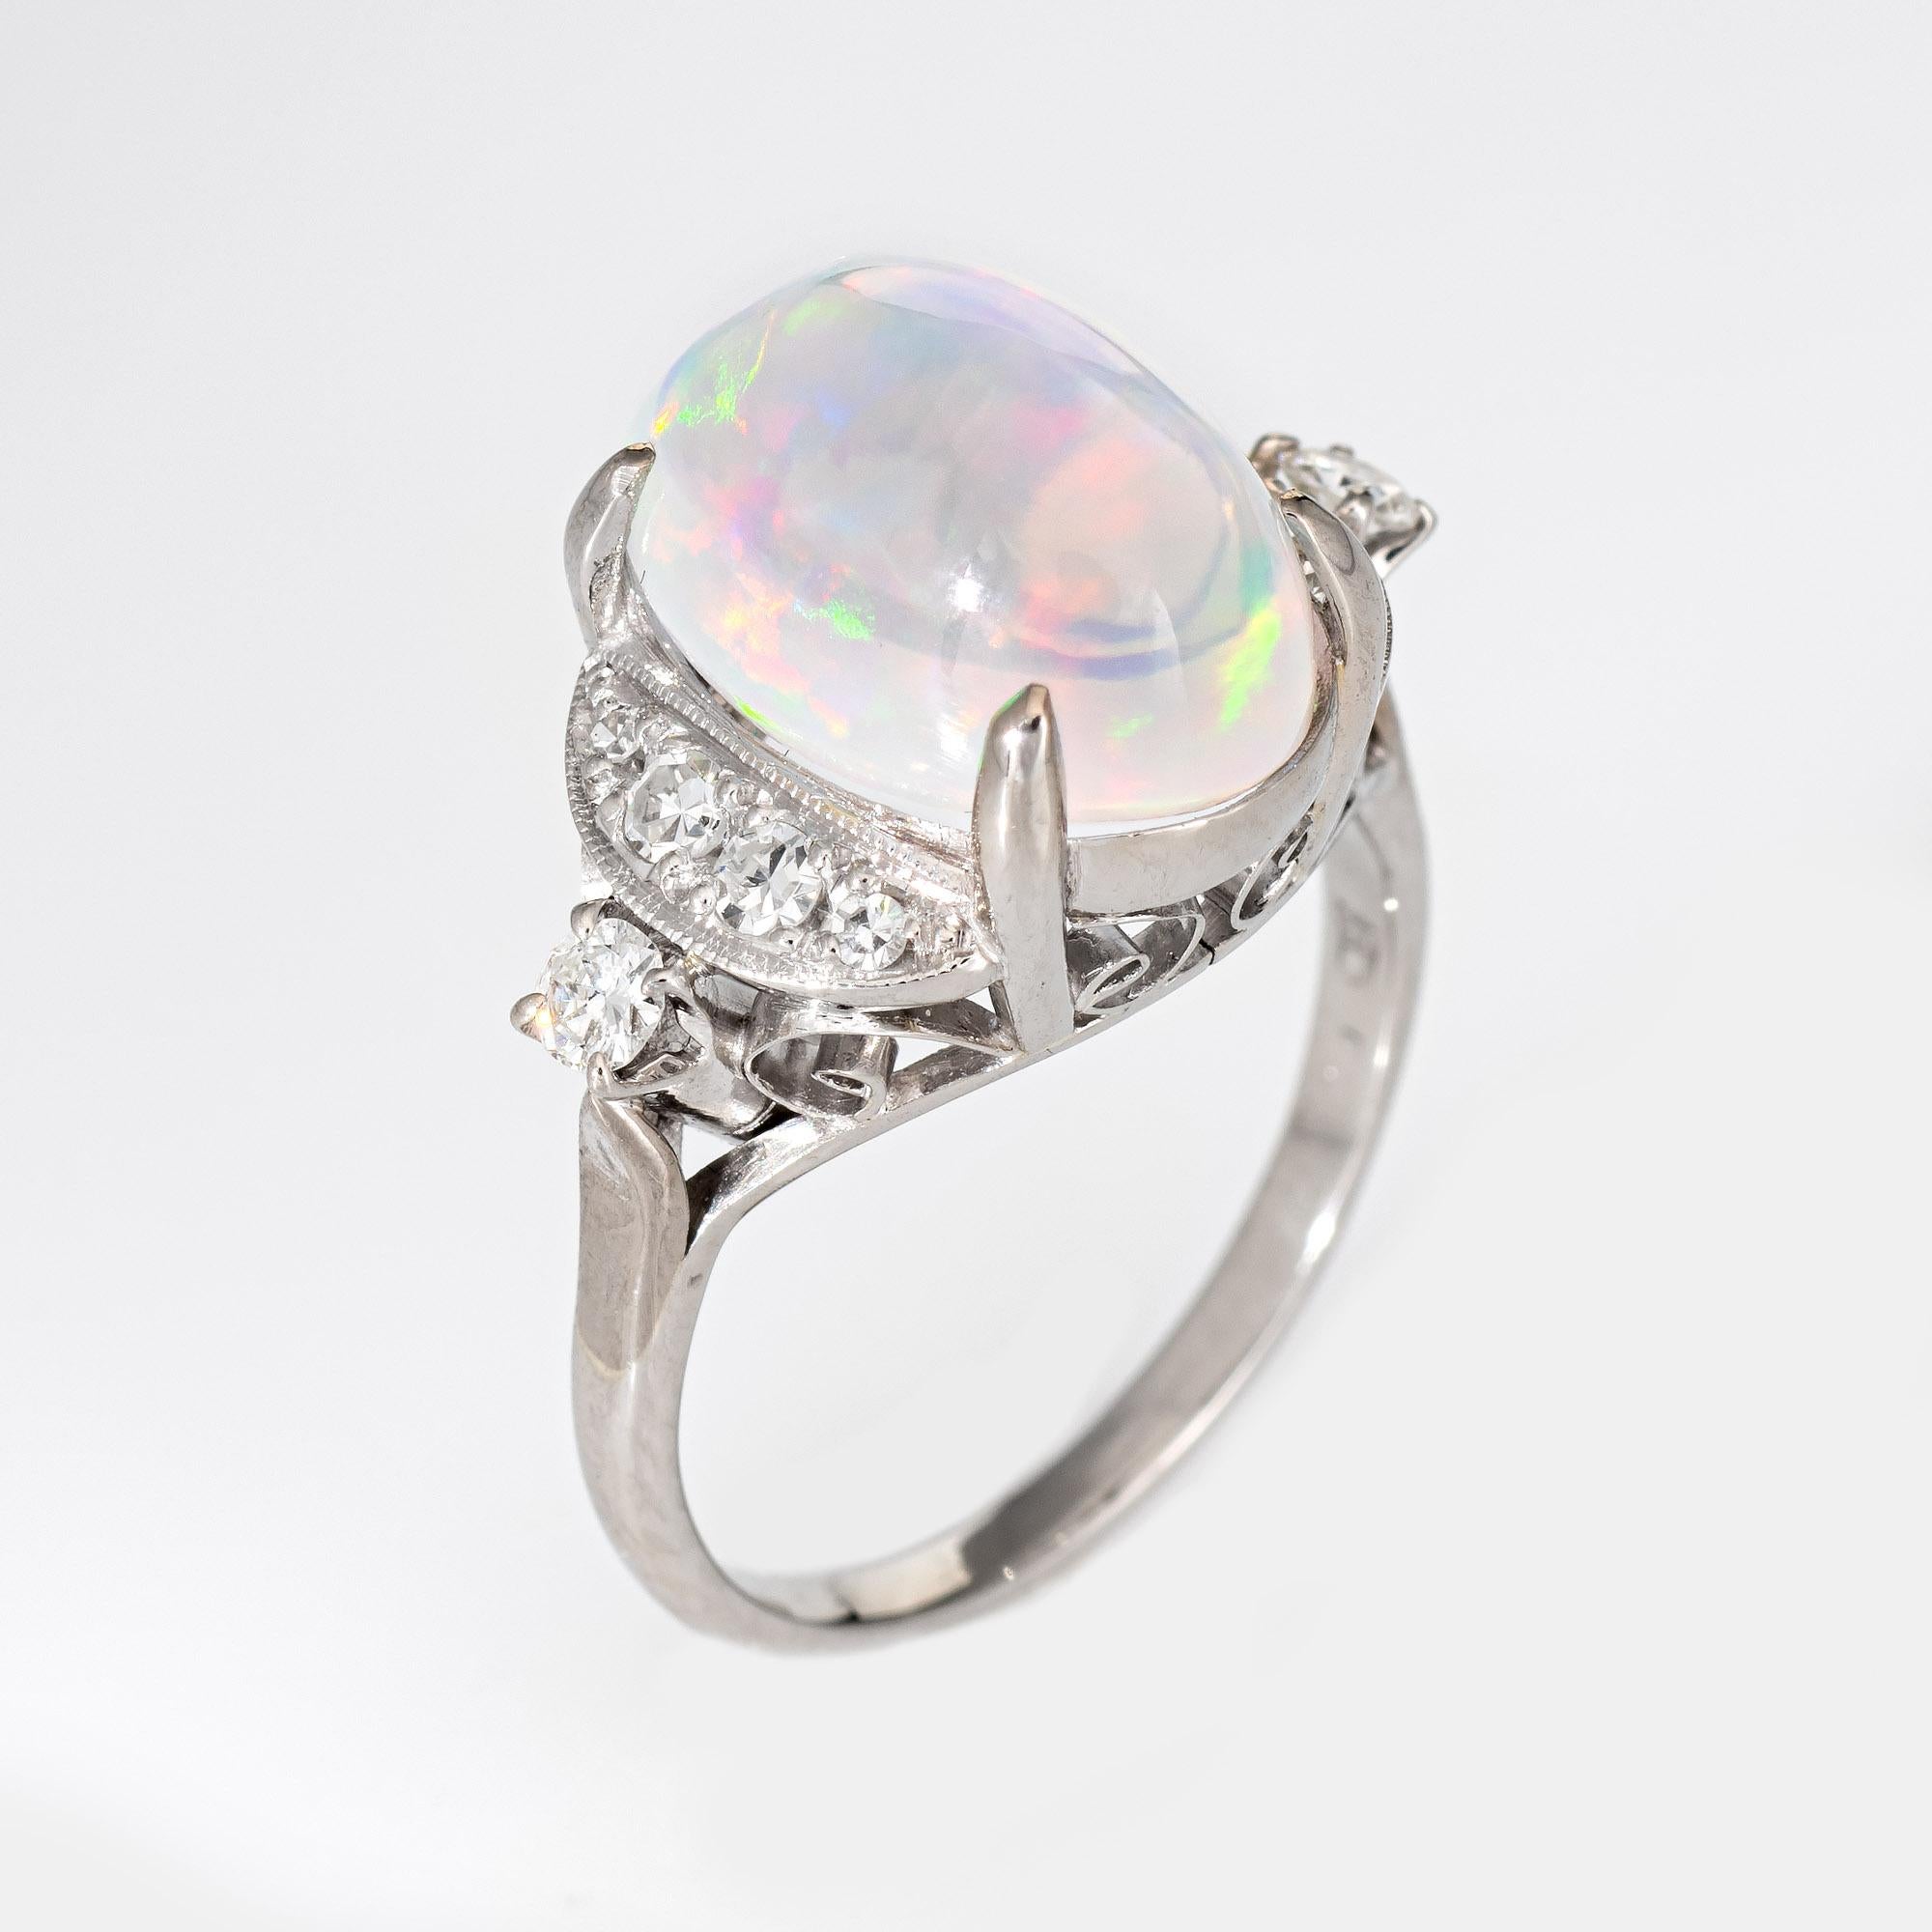 Stylish natural jelly opal & diamond cocktail ring crafted in 900 platinum. 

Cabochon cut natural jelly opal, 4.92 carats (11.40 x 9mm x 9.3mm). The opal  is in excellent condition and free of cracks or chips. The opal exhibits a strong play of